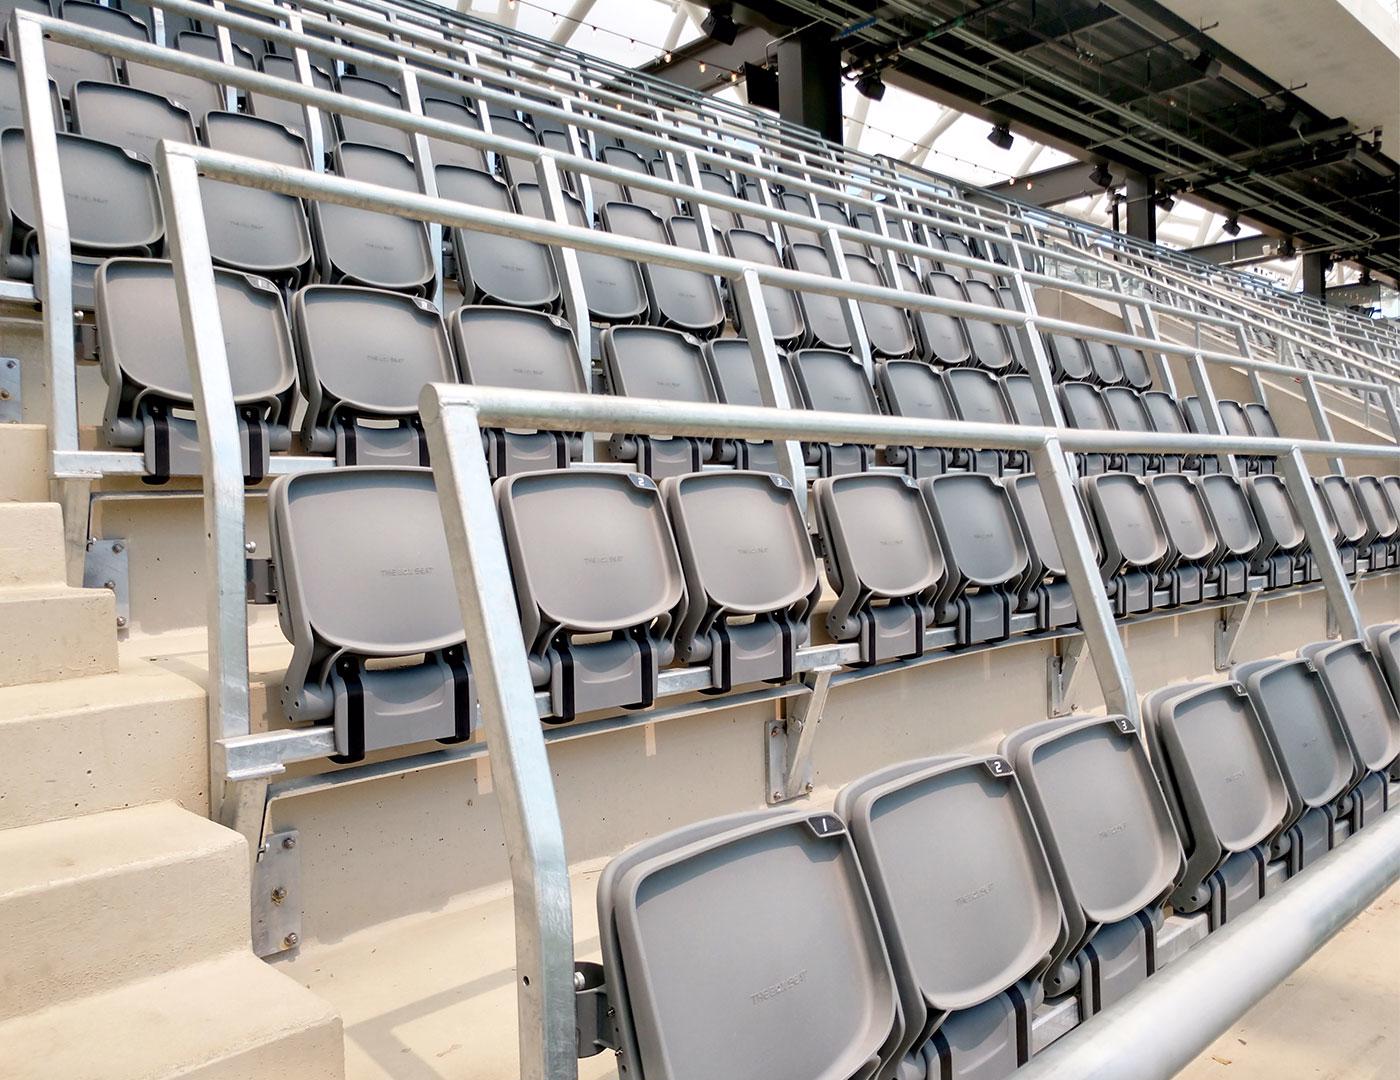 Trex Commercial Products Brings Fans to Their Feet With Safe Standing Solutions